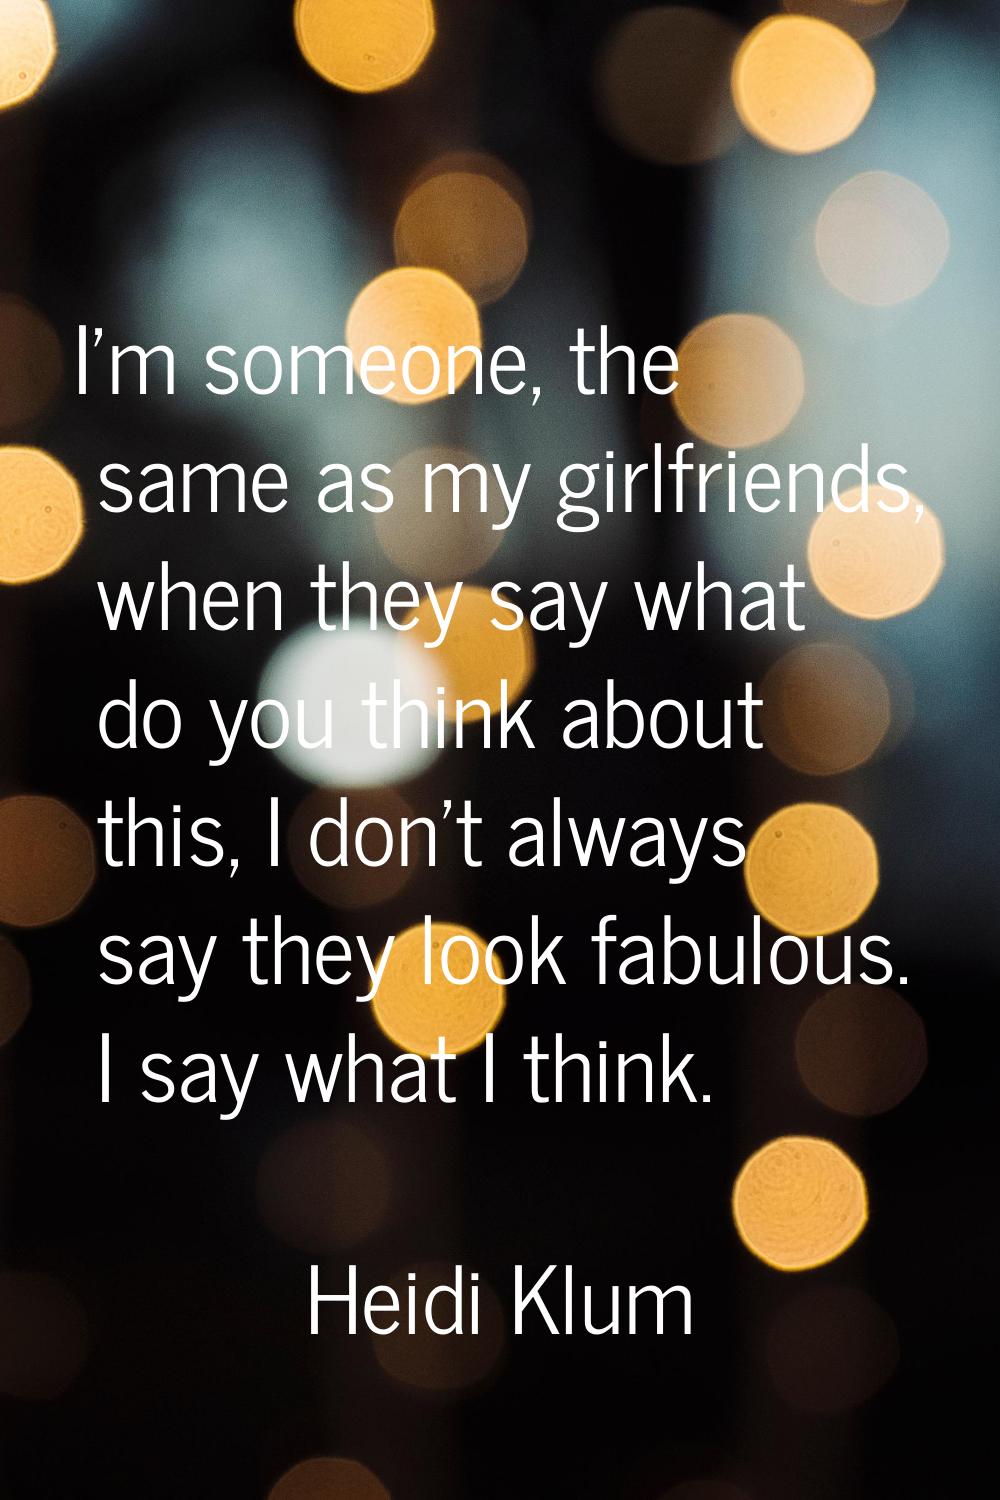 I'm someone, the same as my girlfriends, when they say what do you think about this, I don't always